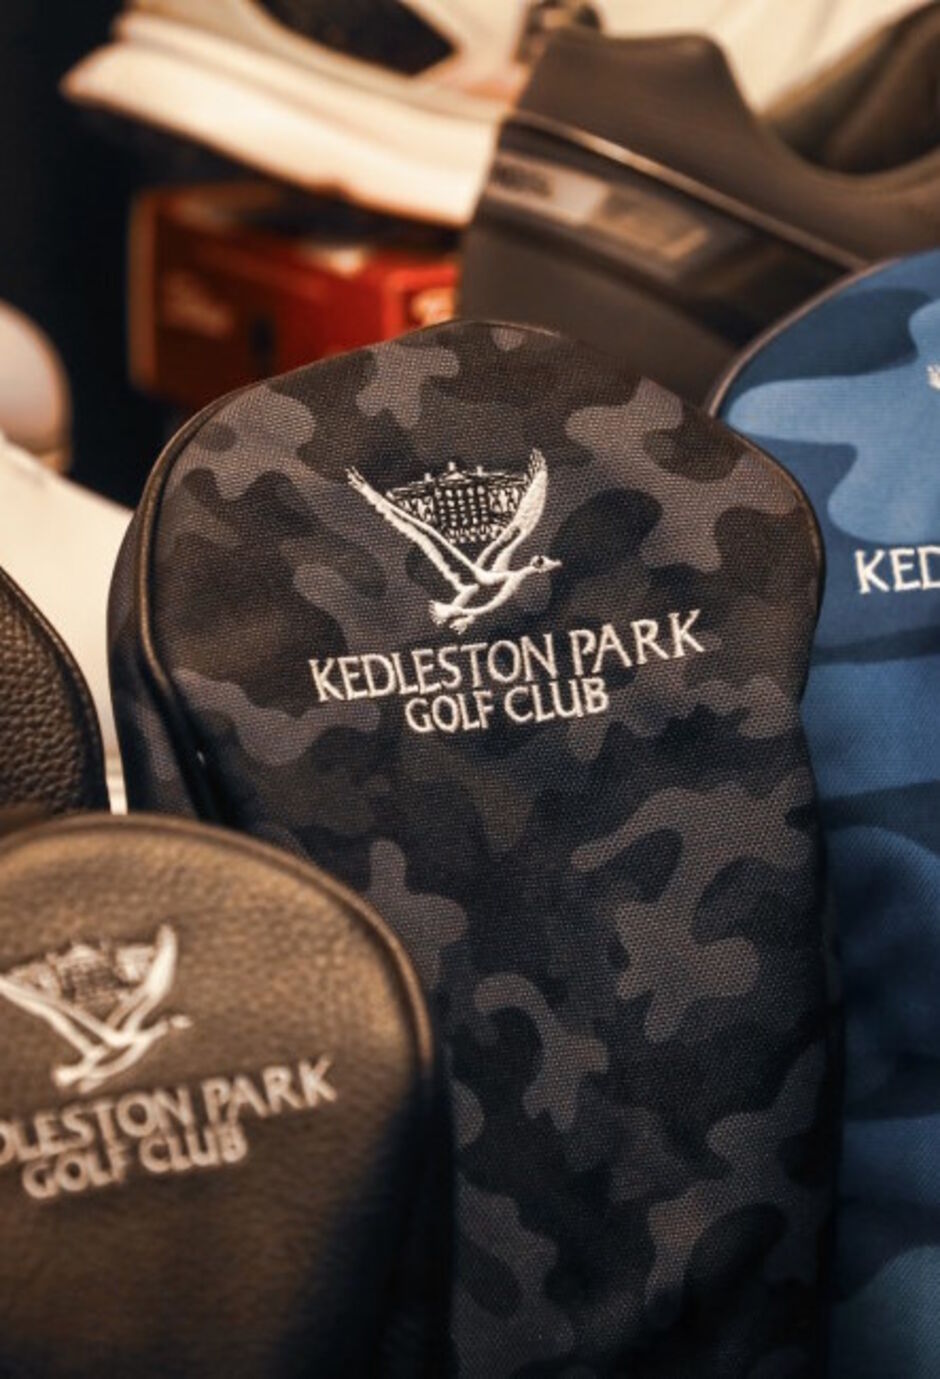 Head Covers of different drivers in the Kedleston Park Golf Club Pro Shop